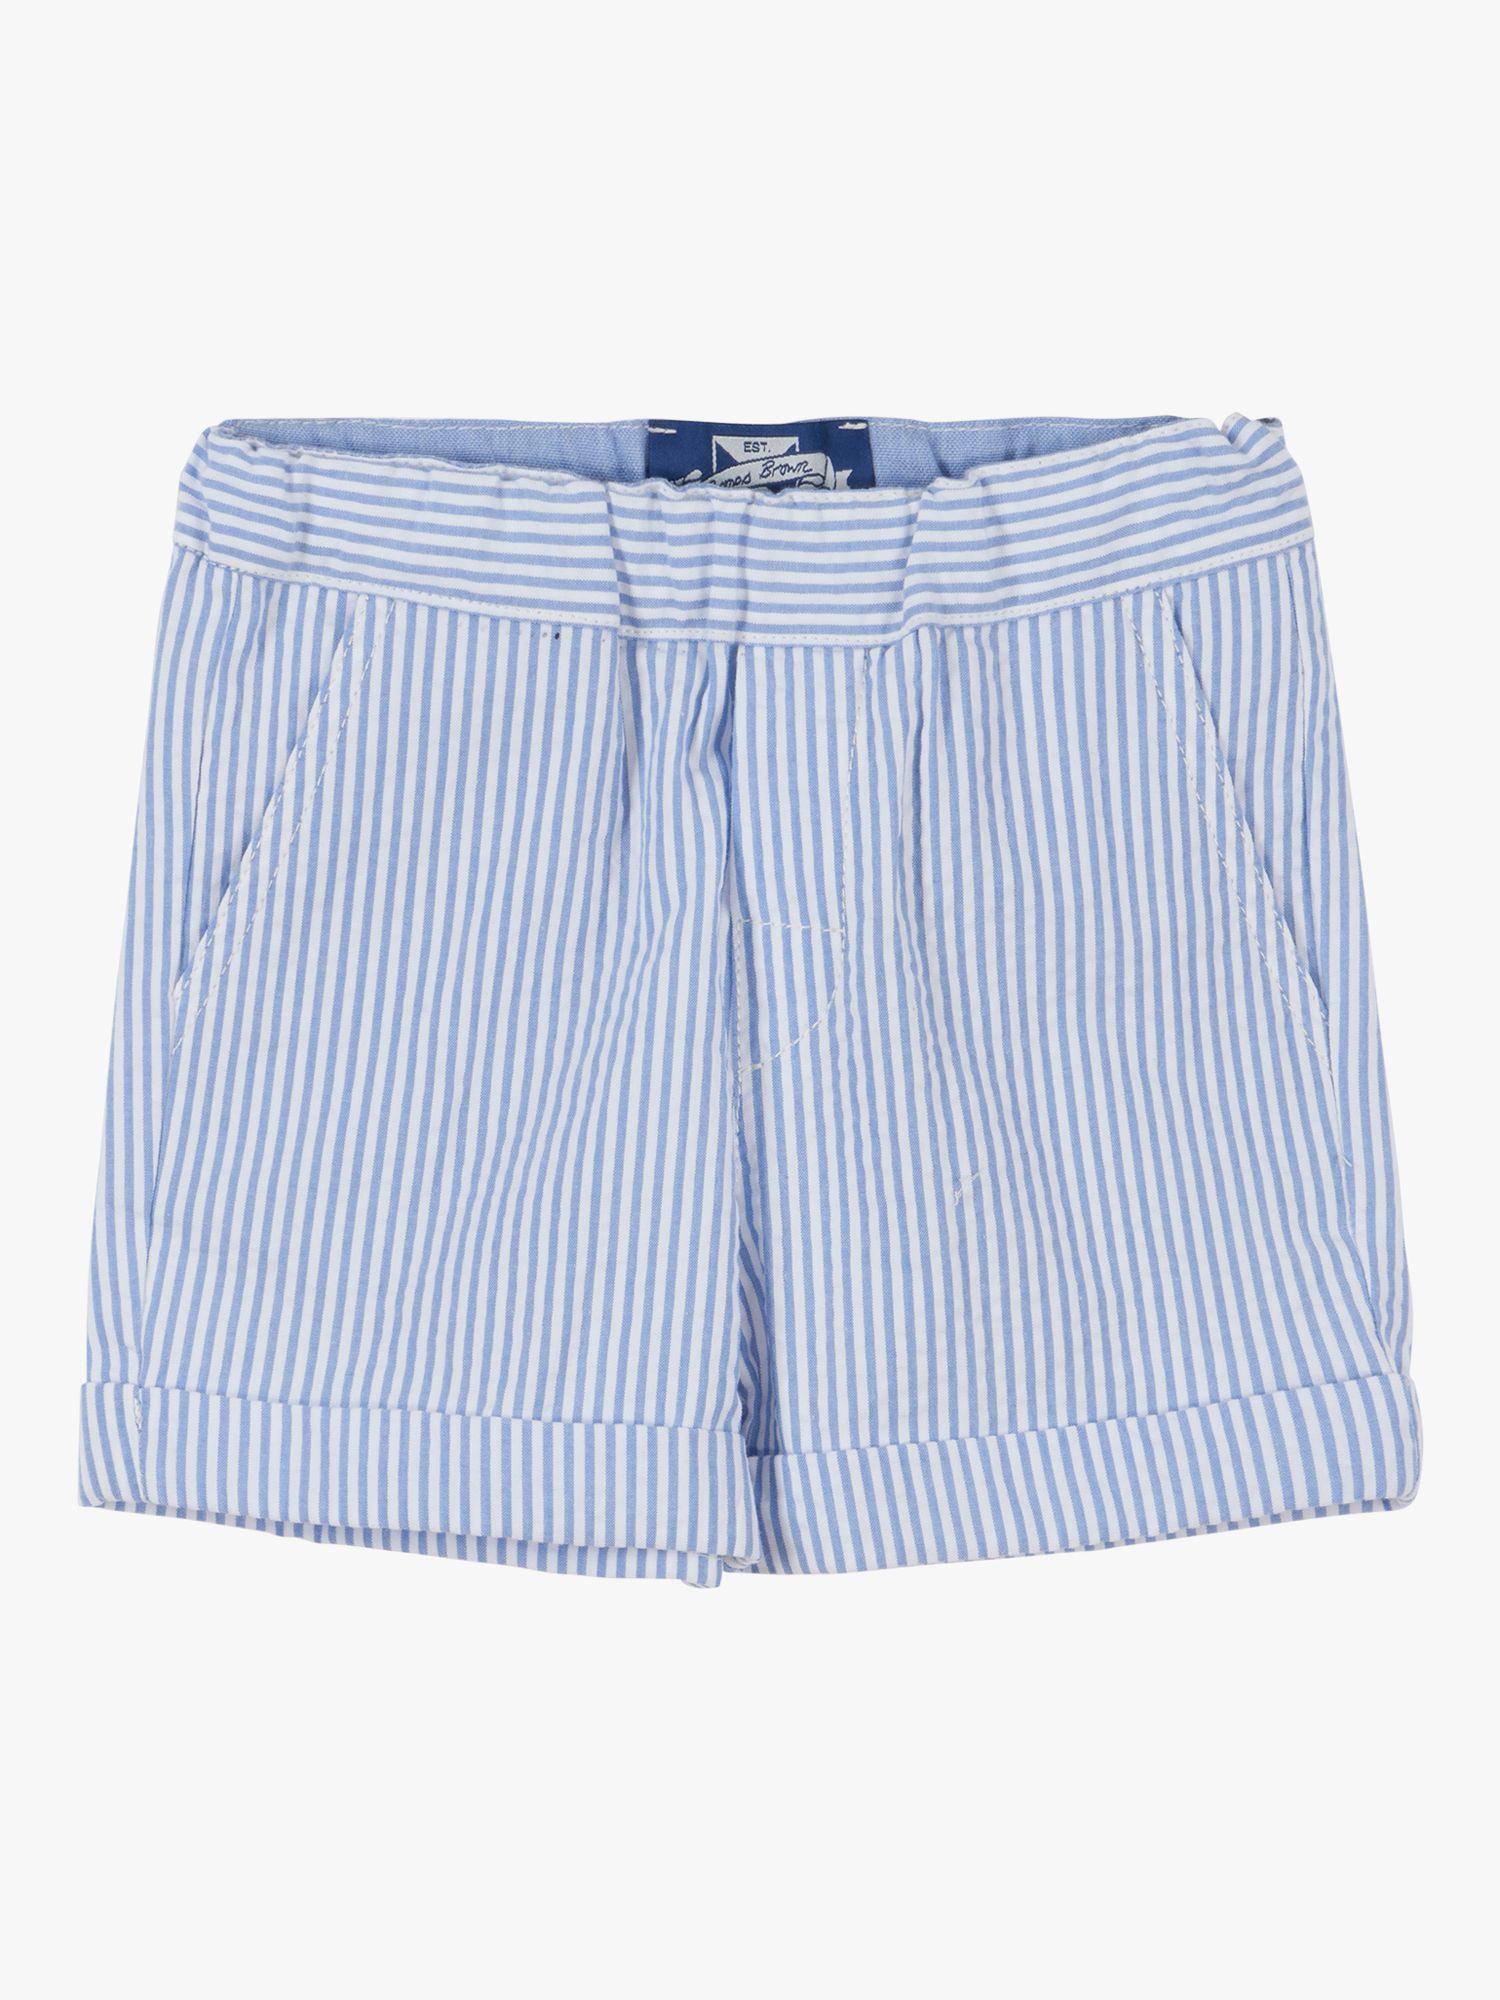 Trotters Baby Charlie Stripe Pull Up Shorts, Blue, 3-6 months